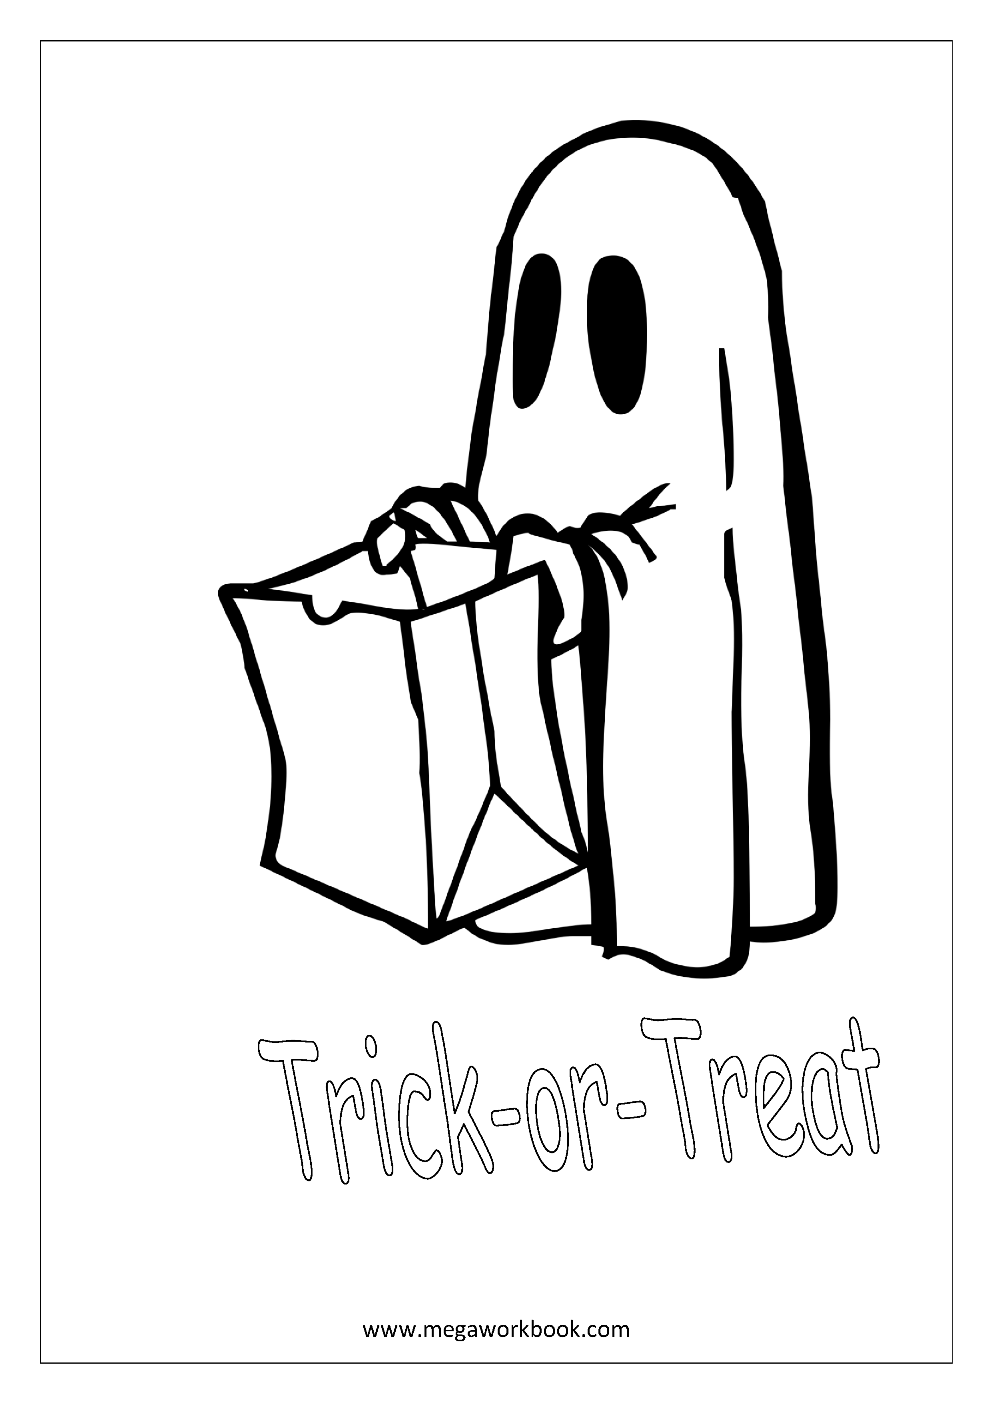 Halloween Coloring Pages - Halloween Coloring Sheets - Halloween